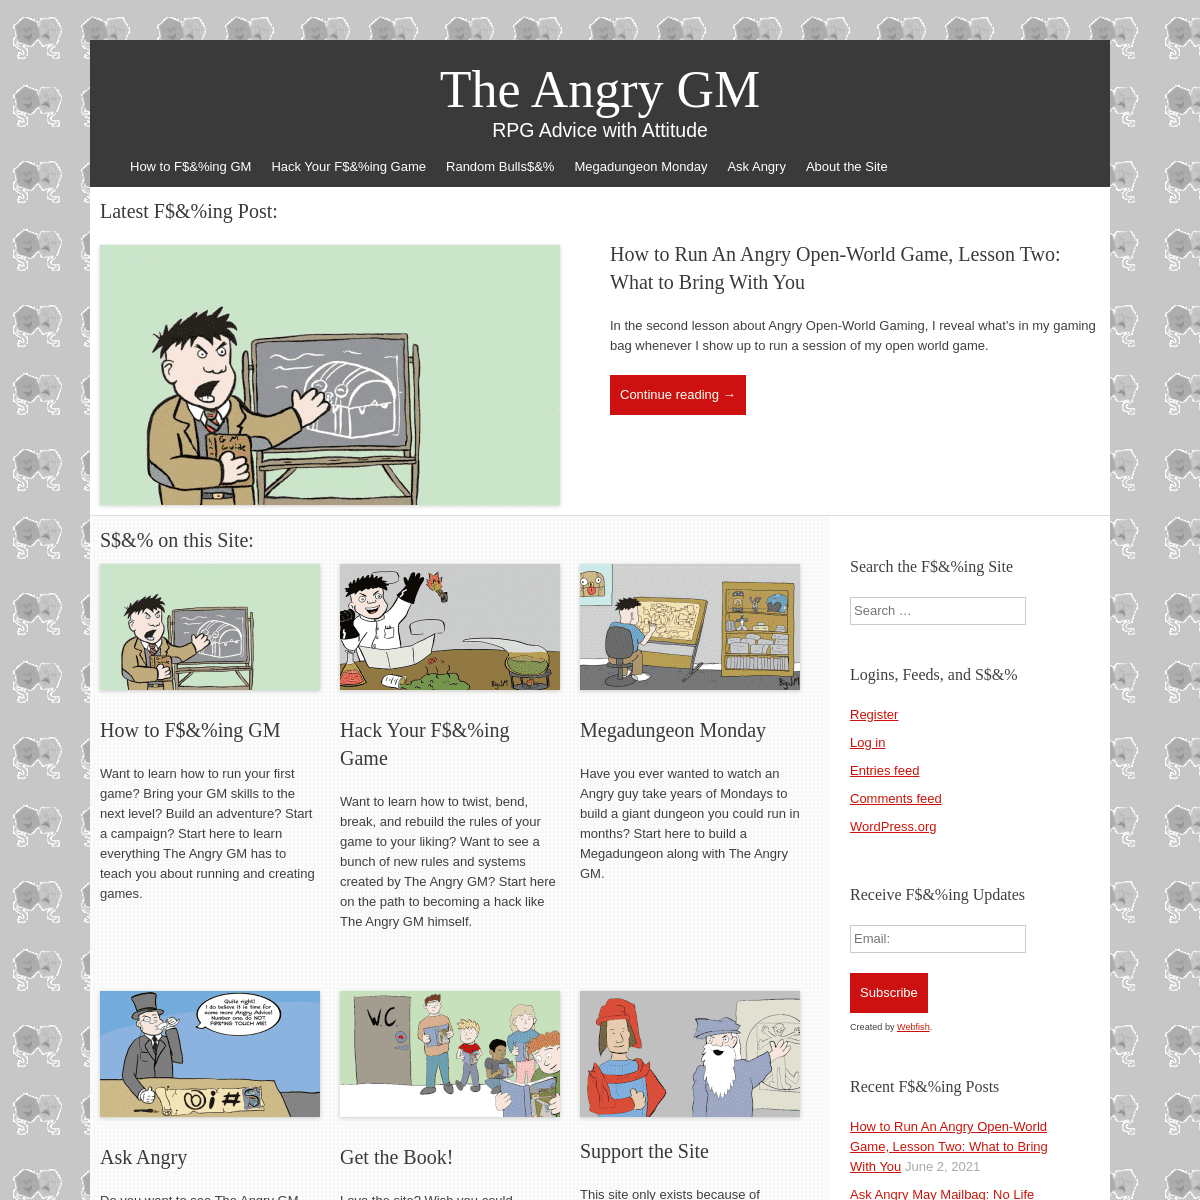 A complete backup of https://theangrygm.com